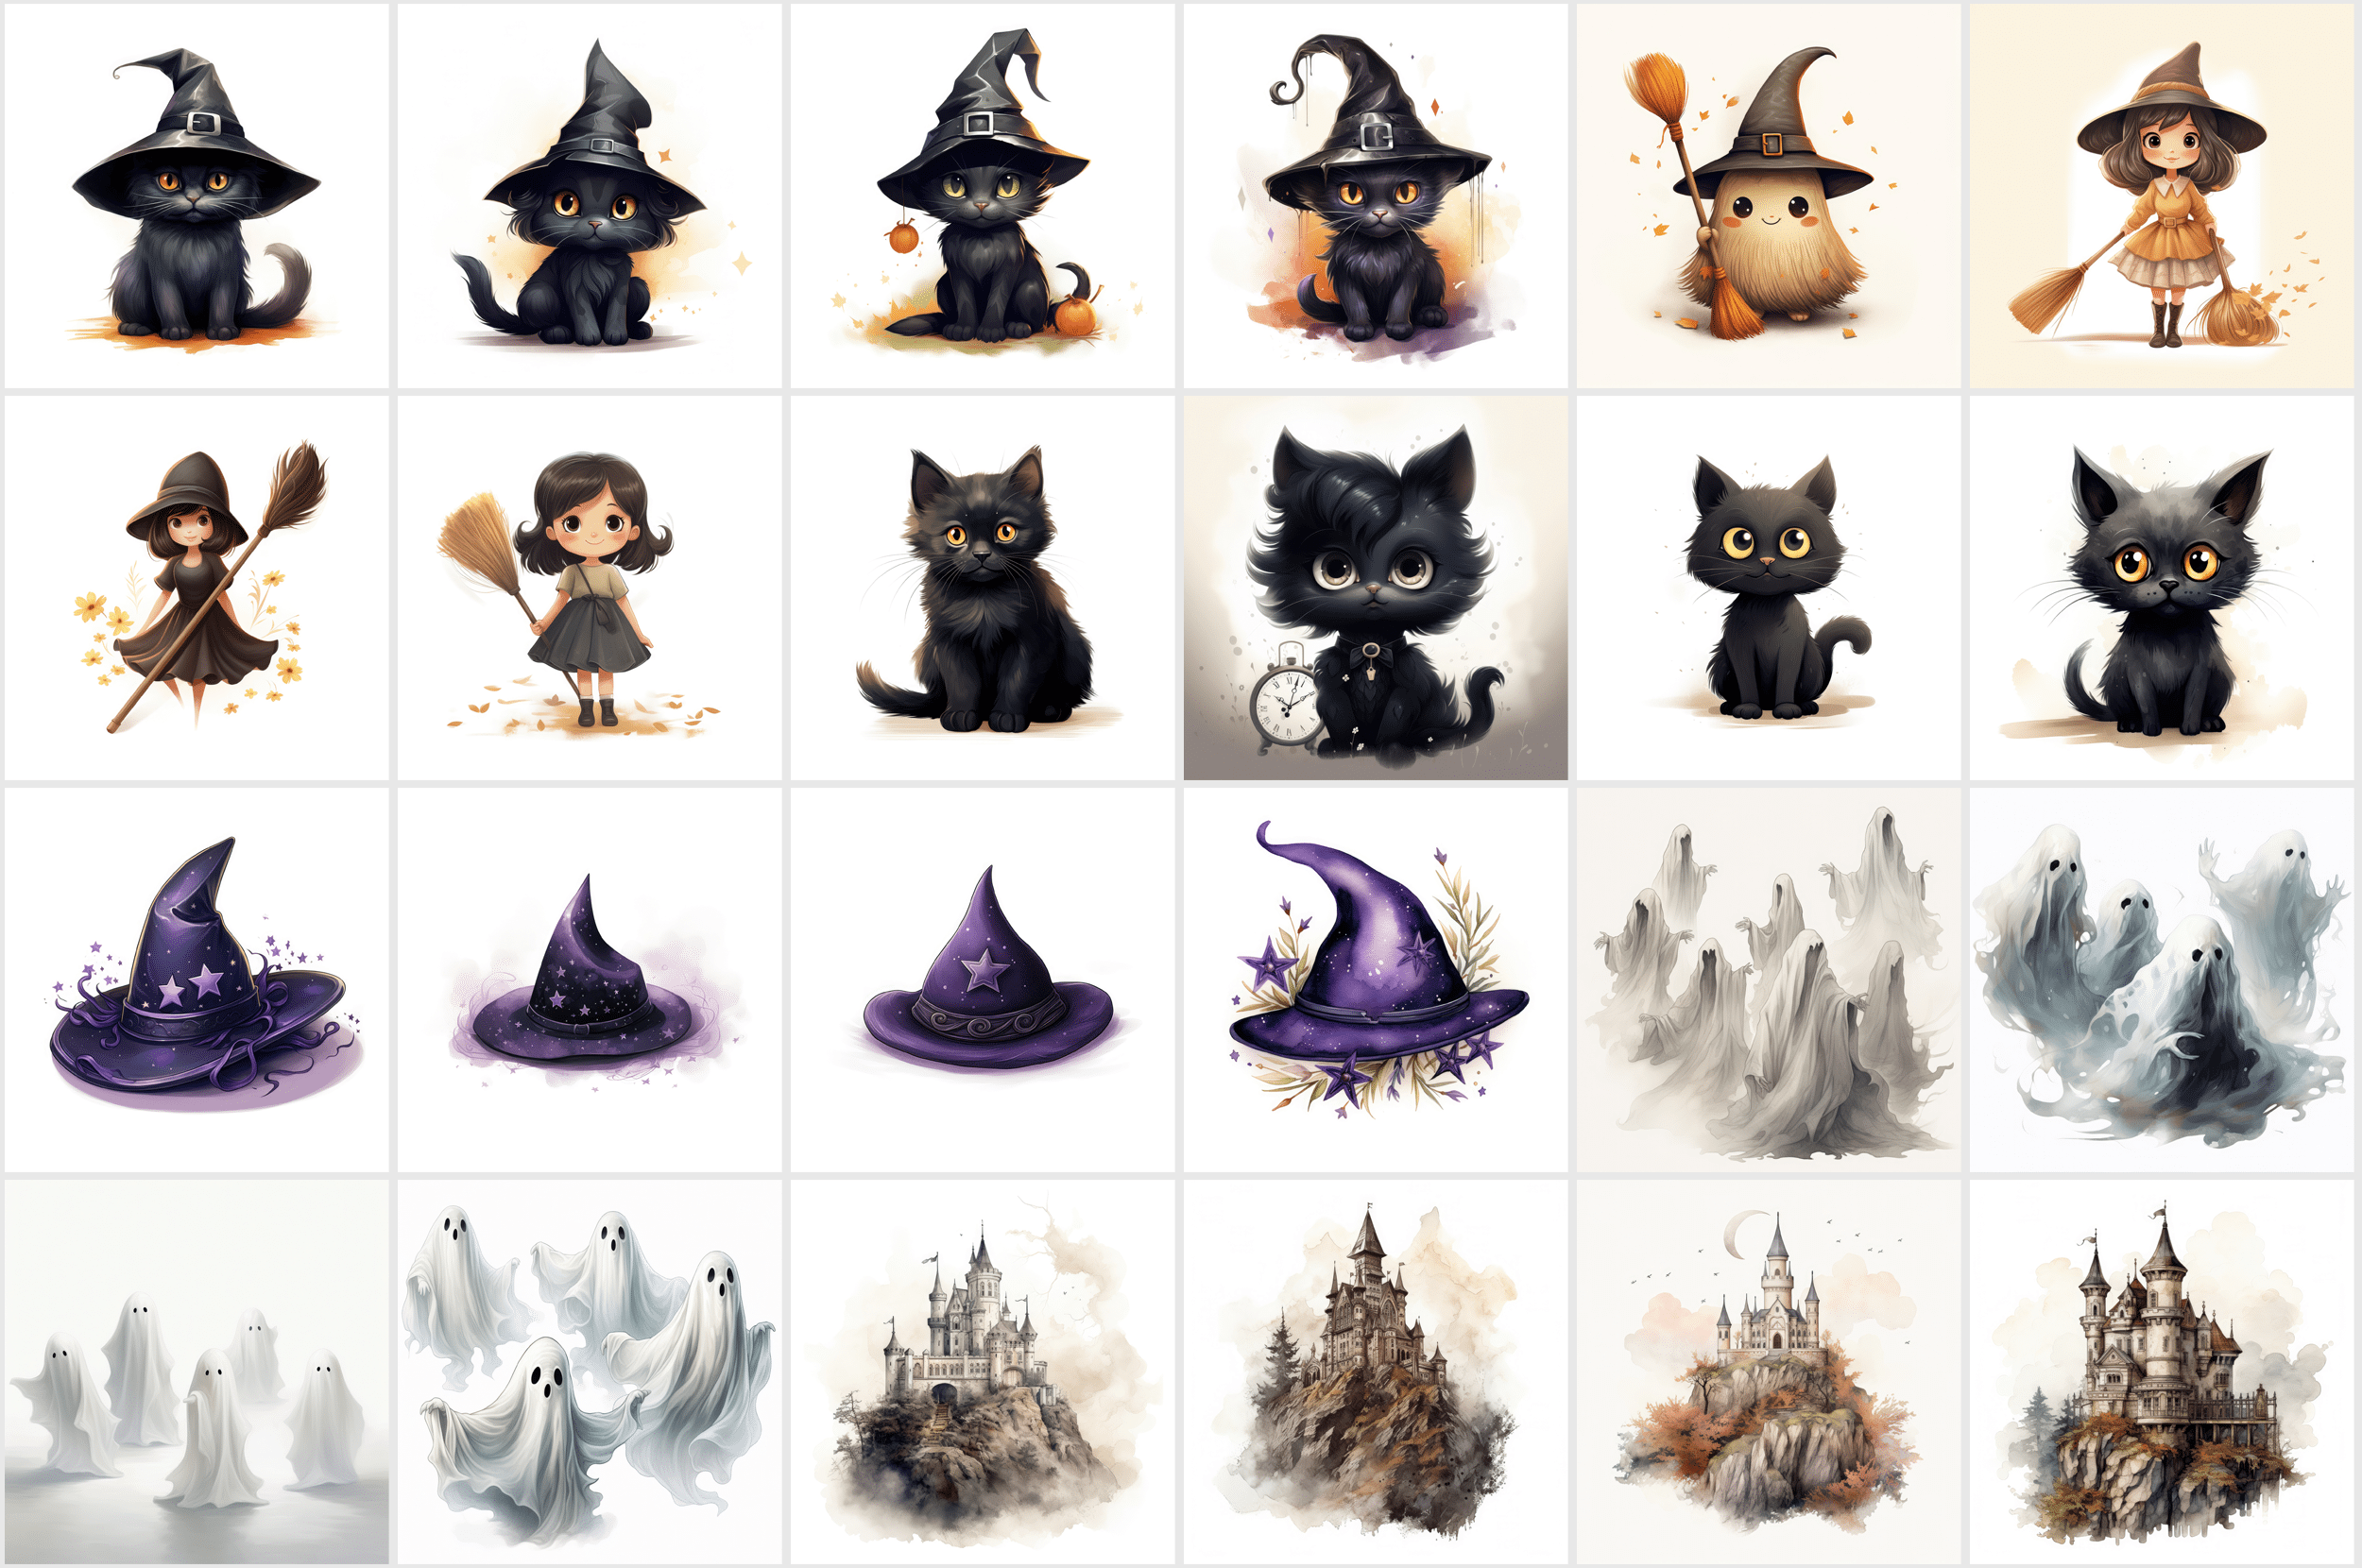 Halloween PNG Illustrations - Ghosts, Witches, Black Cats & More! High-Resolution Digital Images for Commercial Use Digital Download Sumobundle